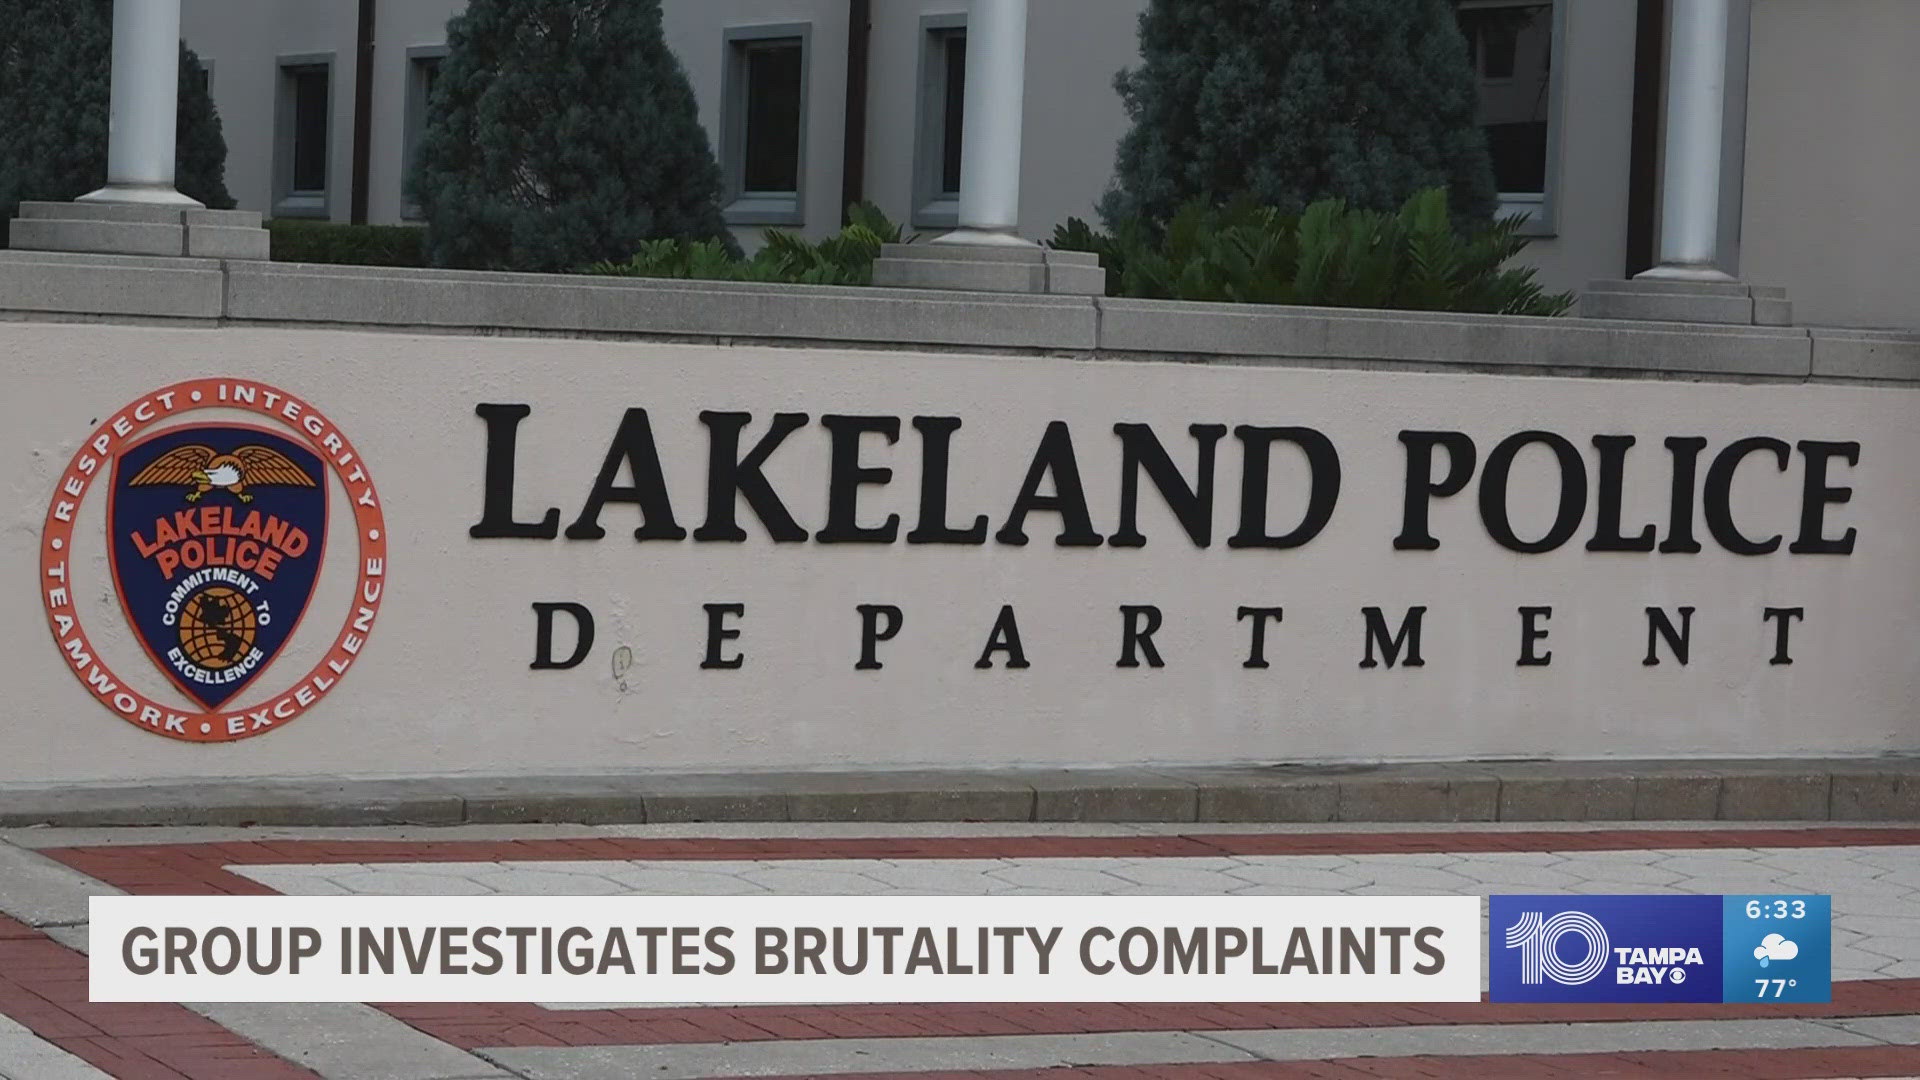 Those complaints center around allegations of police brutality against the Lakeland Police Department.